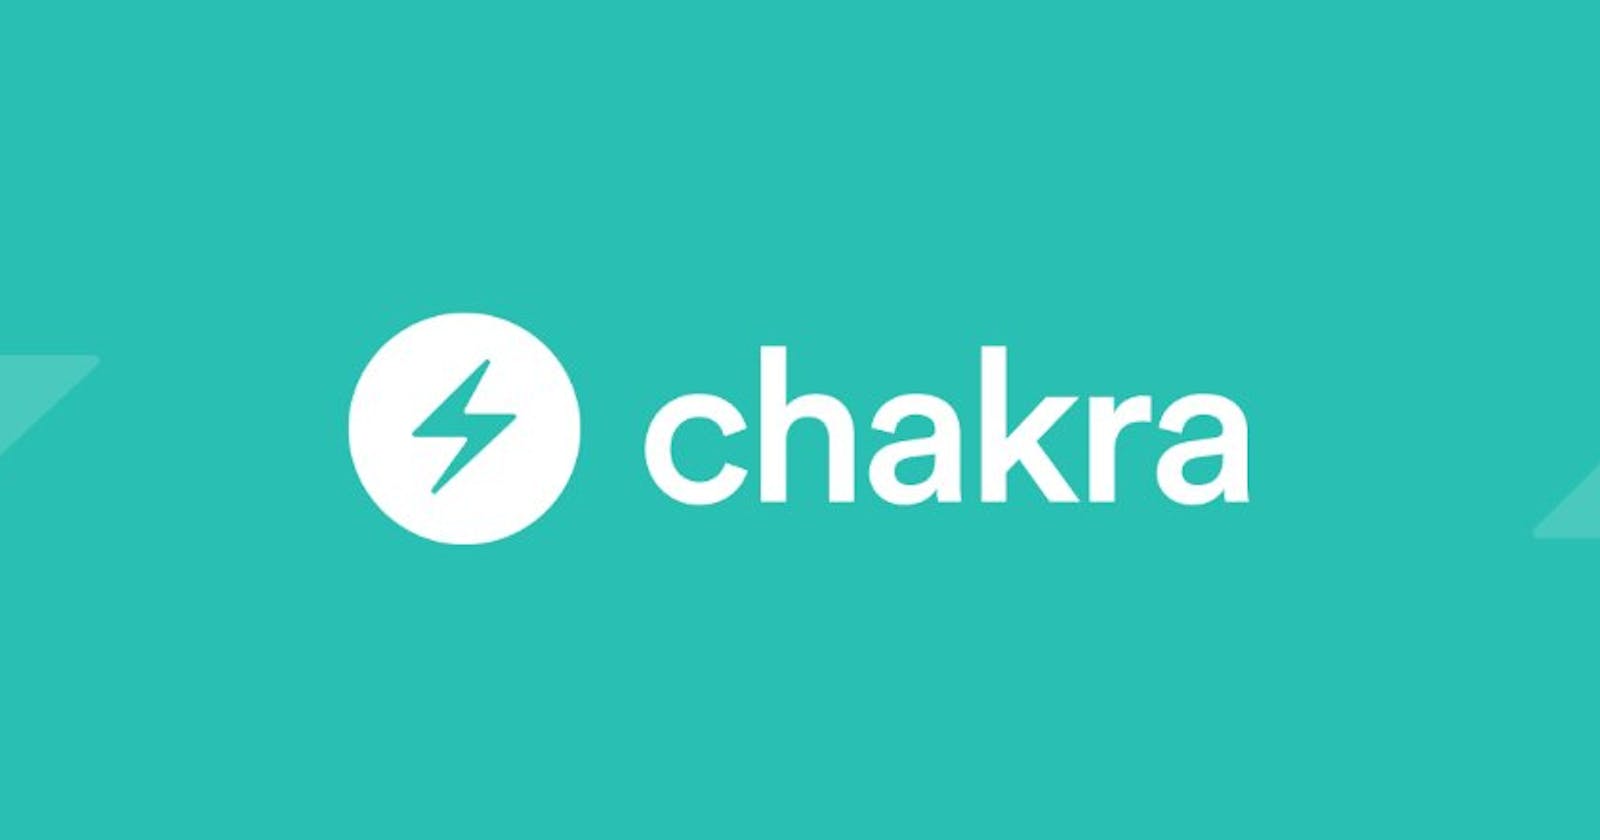 Creating simple React components with Chakra UI